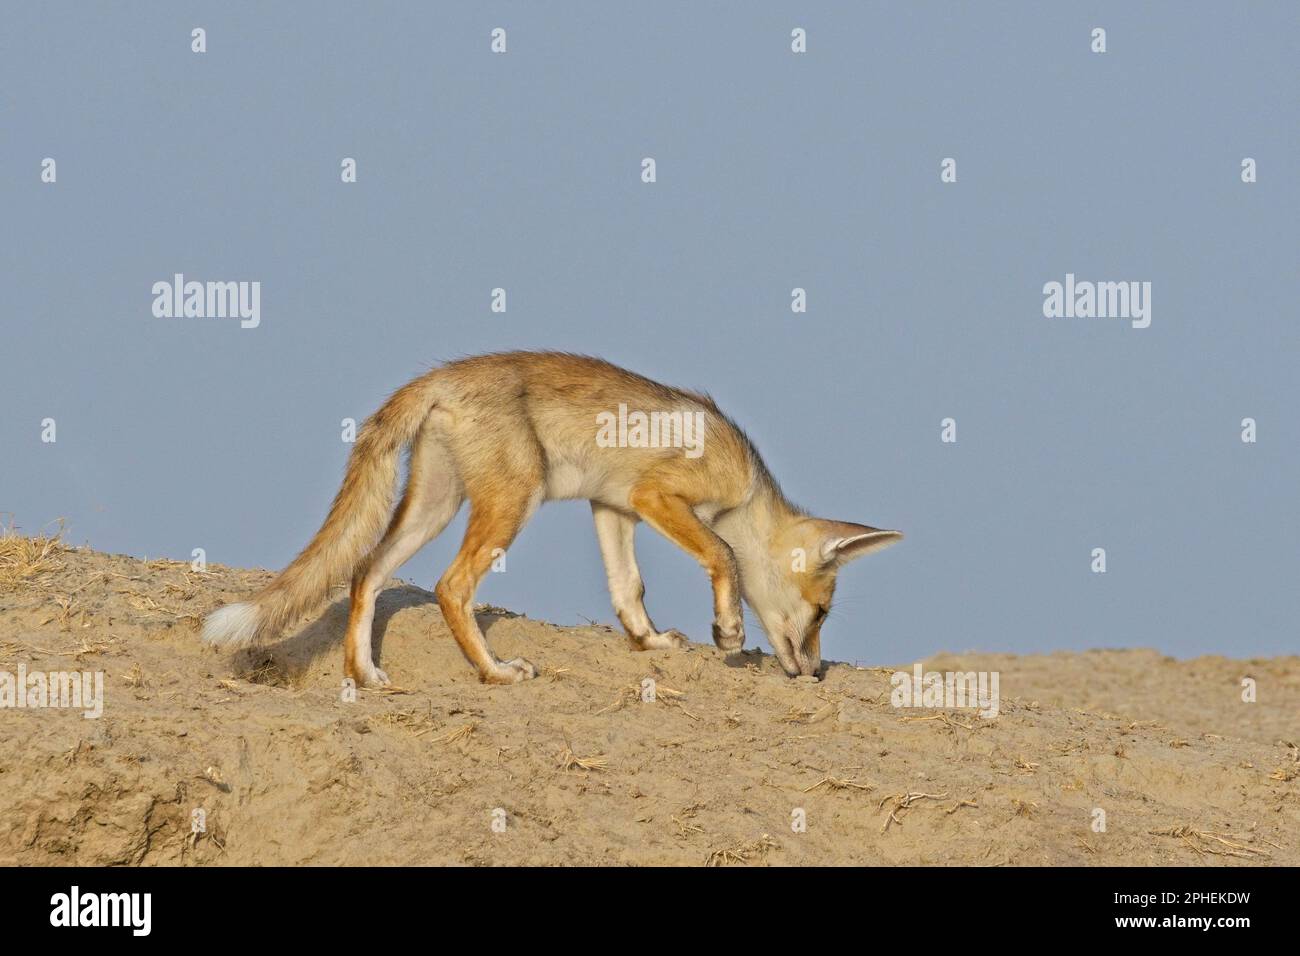 Desert fox (Vulpes vulpes pusilla), also known as the white-footed fox Stock Photo